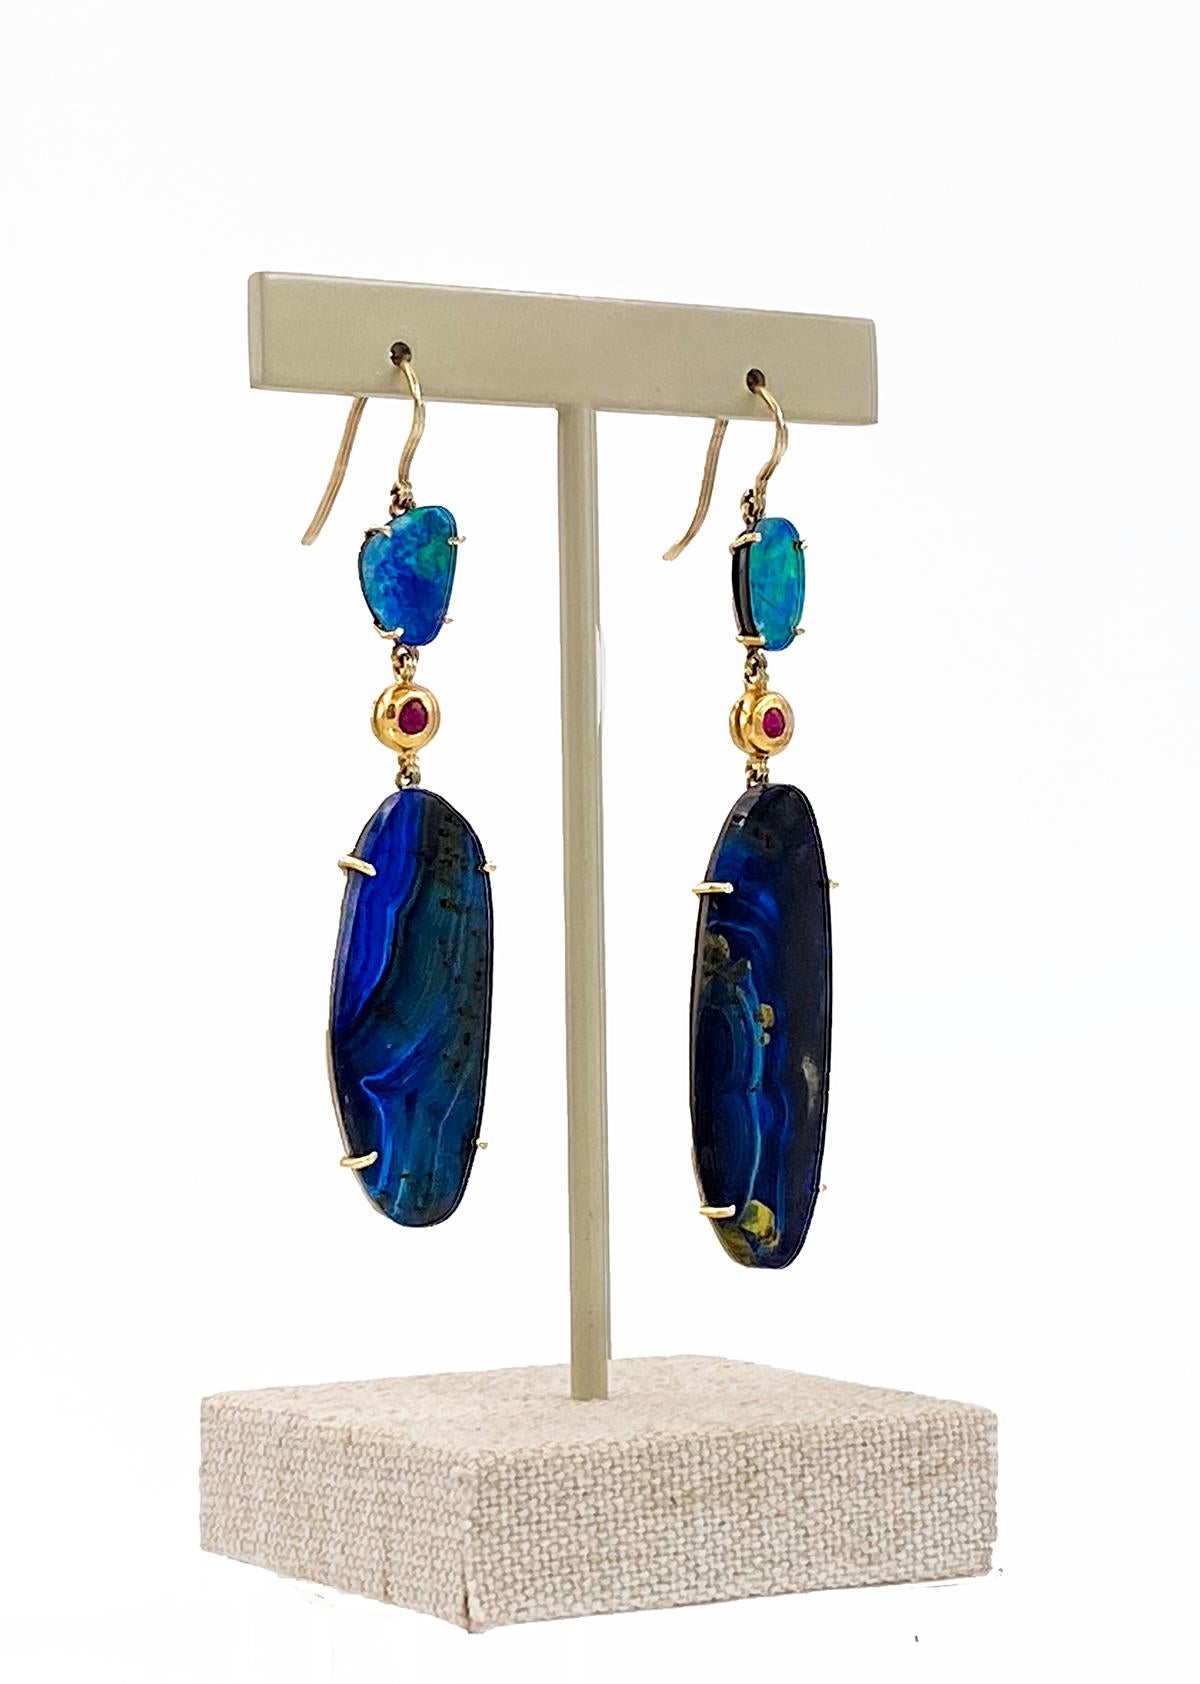 A one-of-a-kind pair of dreamy earrings by Carrie Hoffman. This vibrant pair boldly features ethereal blue-hinted natural opal and blue Amazonite, tied together with deep, bright red natural bezel-set rubies. 

The look is substantial but they are